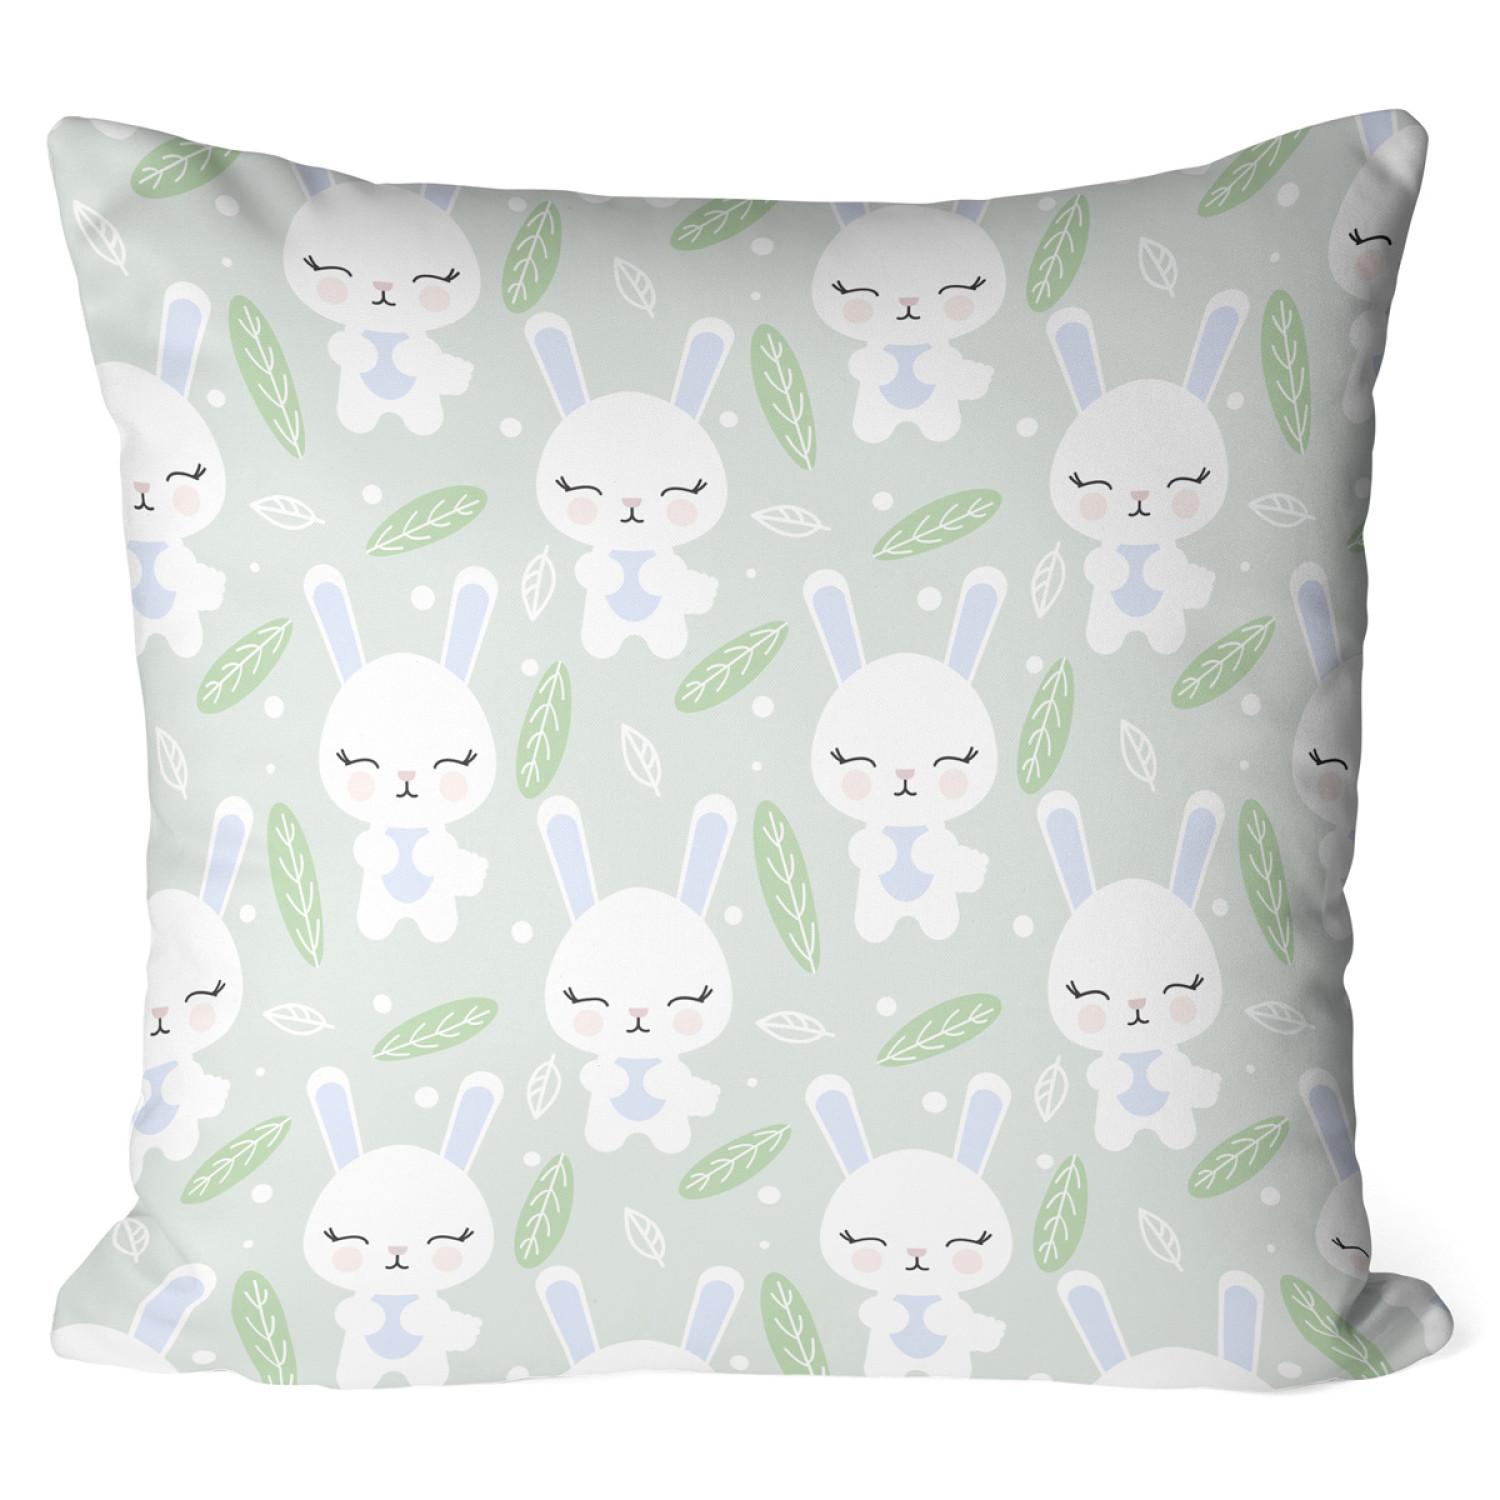 Decorative Microfiber Pillow Group of hares - composition in shades of white, blue and green cushions